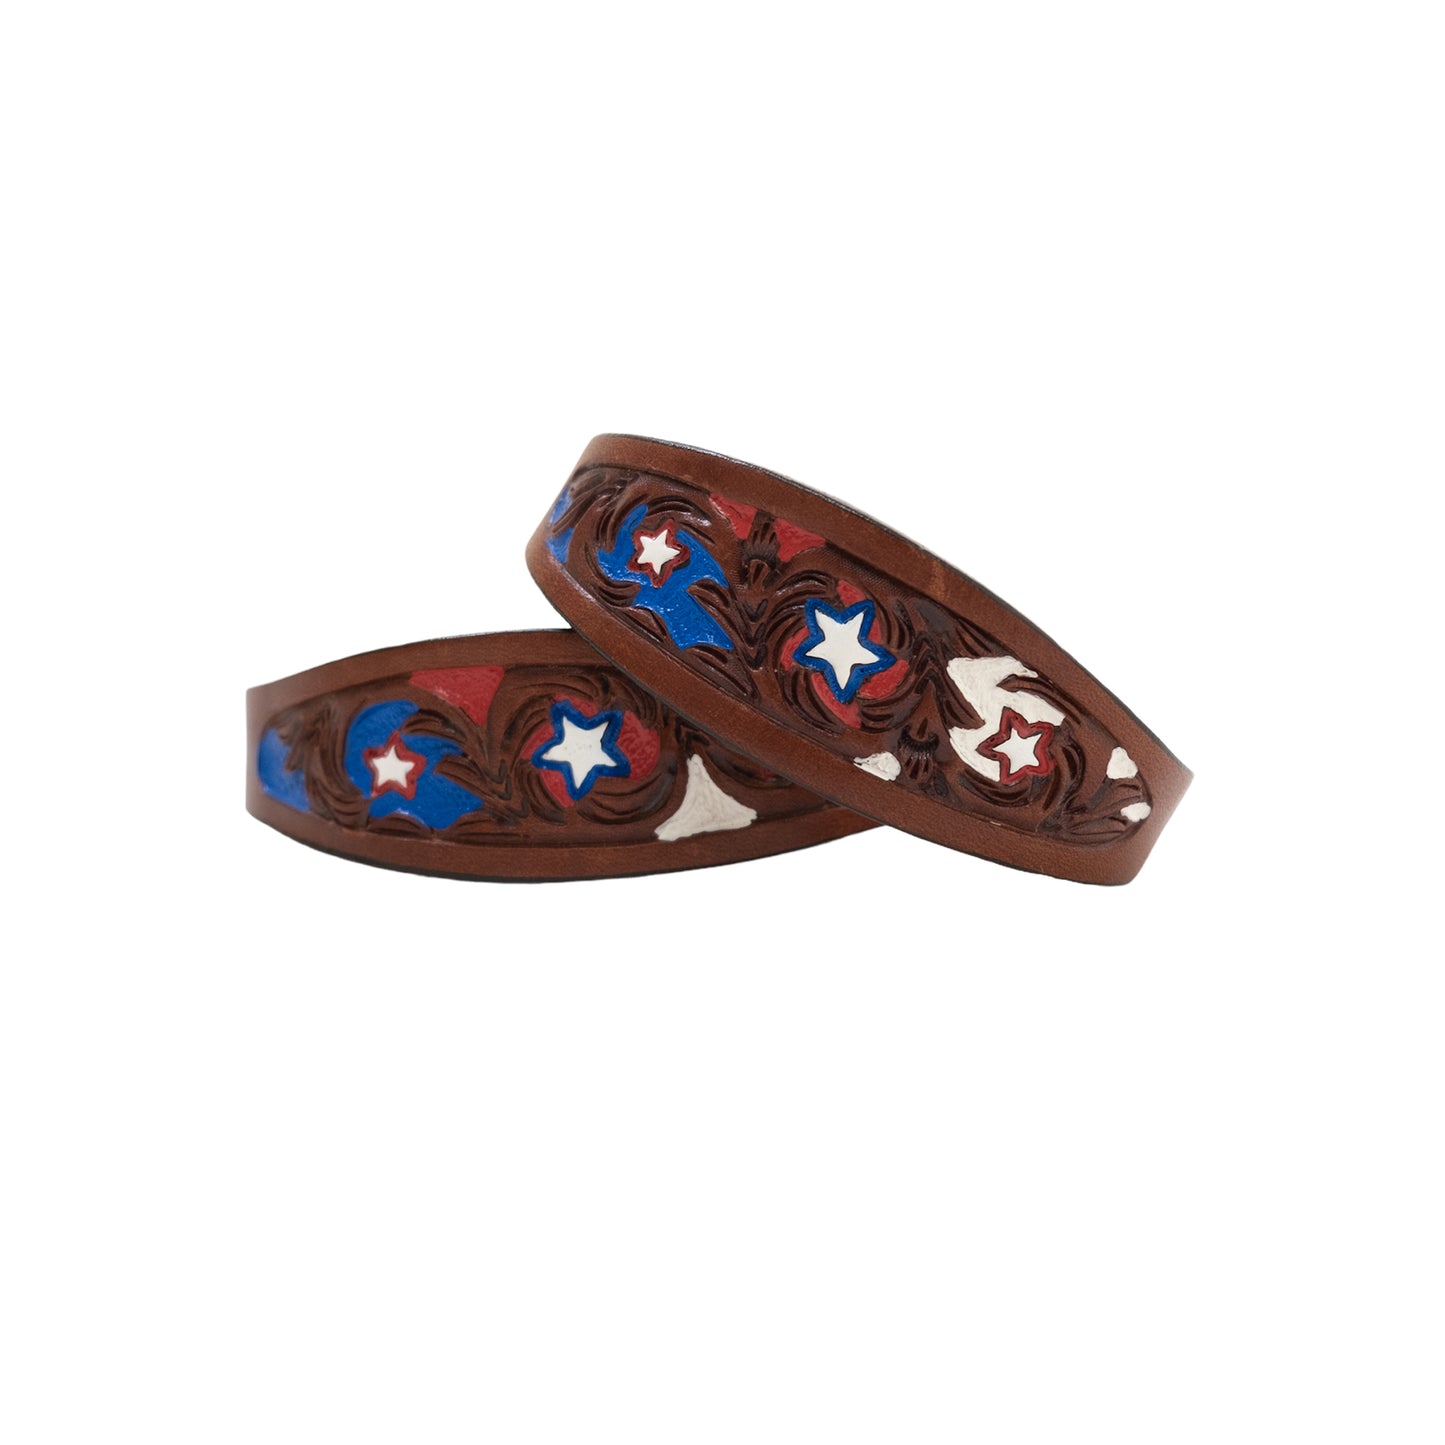 M-304-USA Stirrups hobble straps toast leather combo AA and star tooling with multicolored background paint.